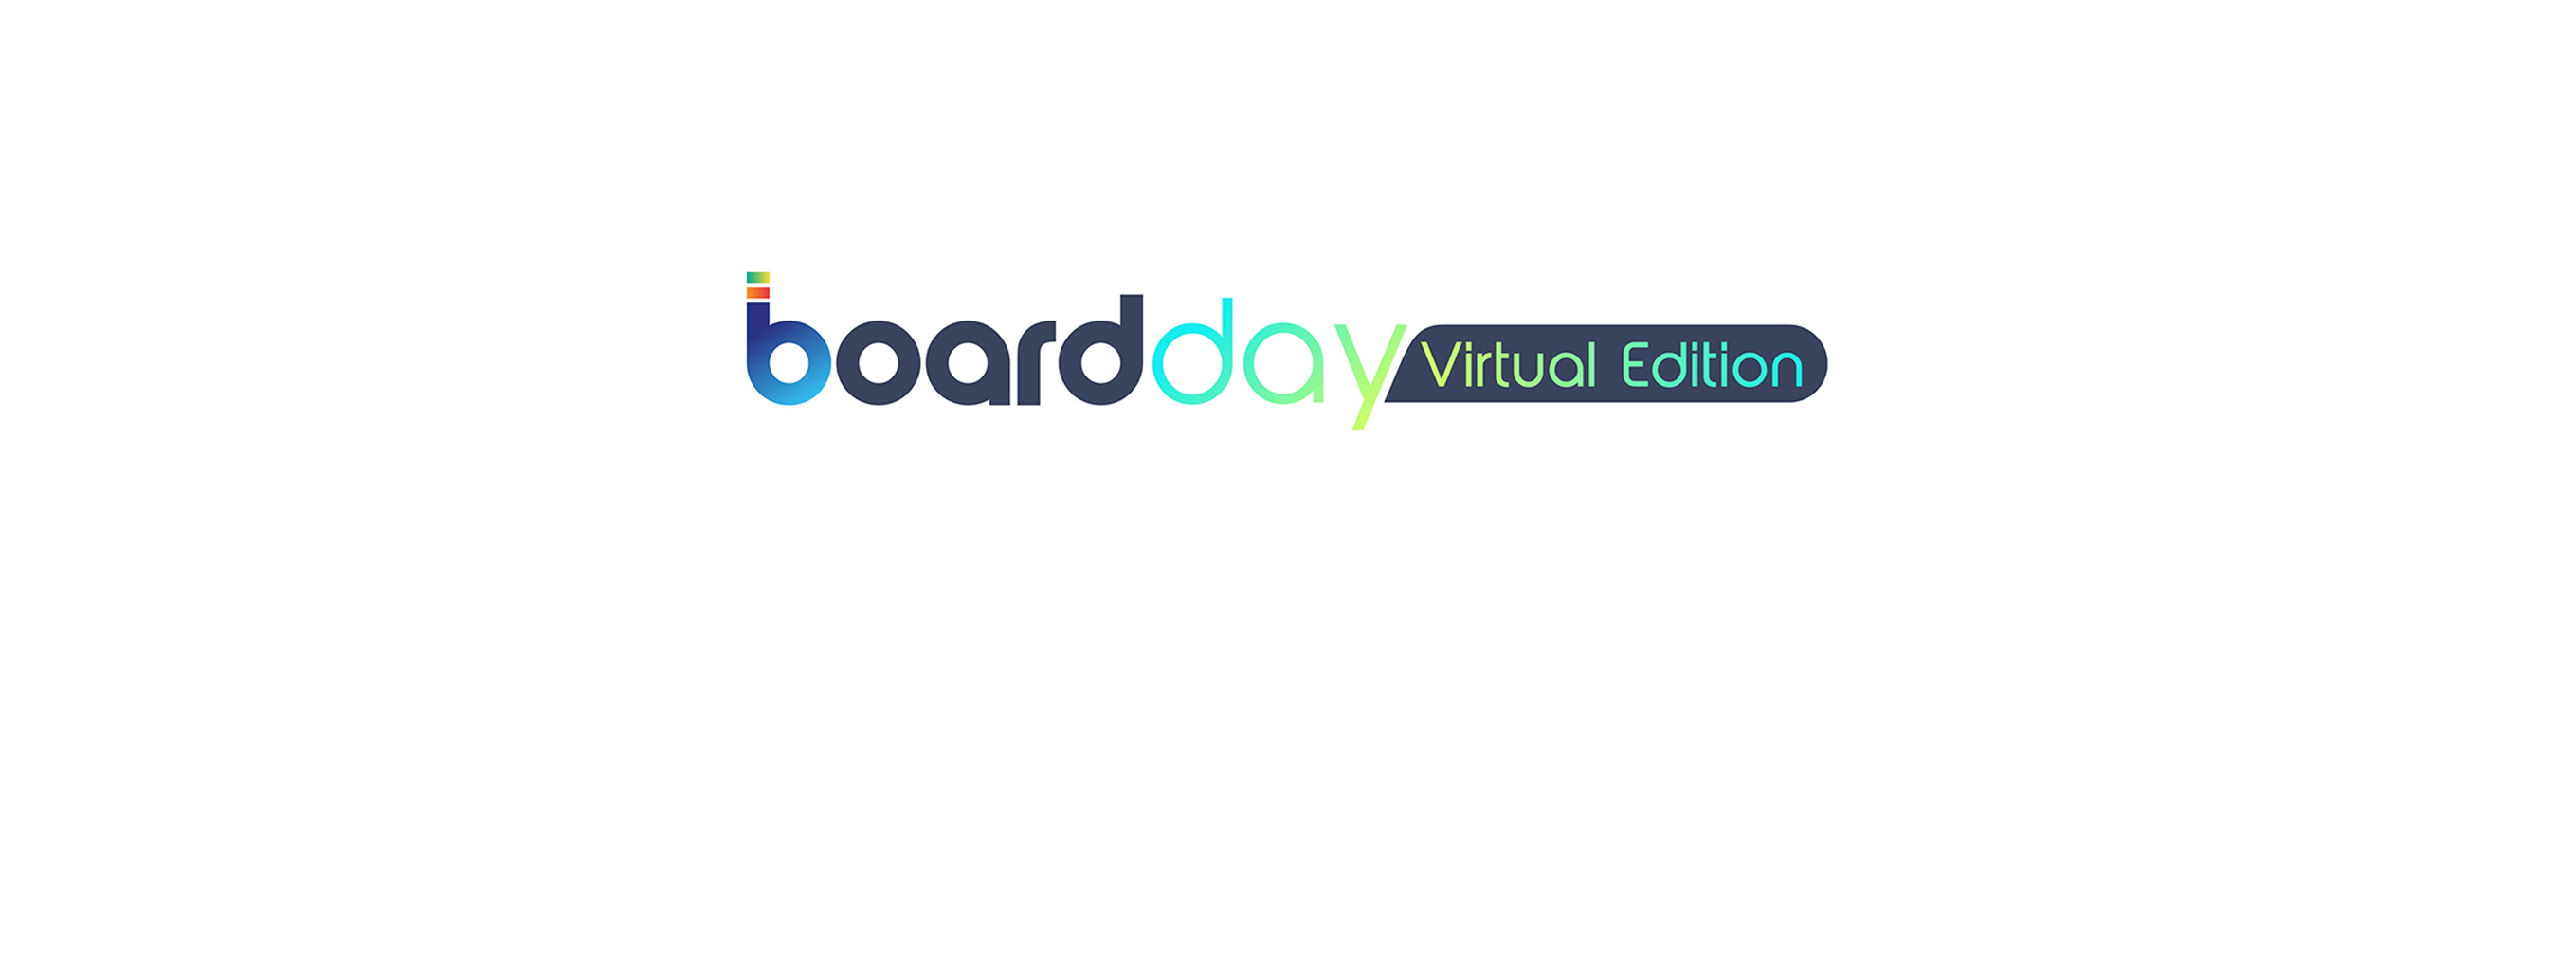 Board Day 2020 Virtual Edition: What to expect